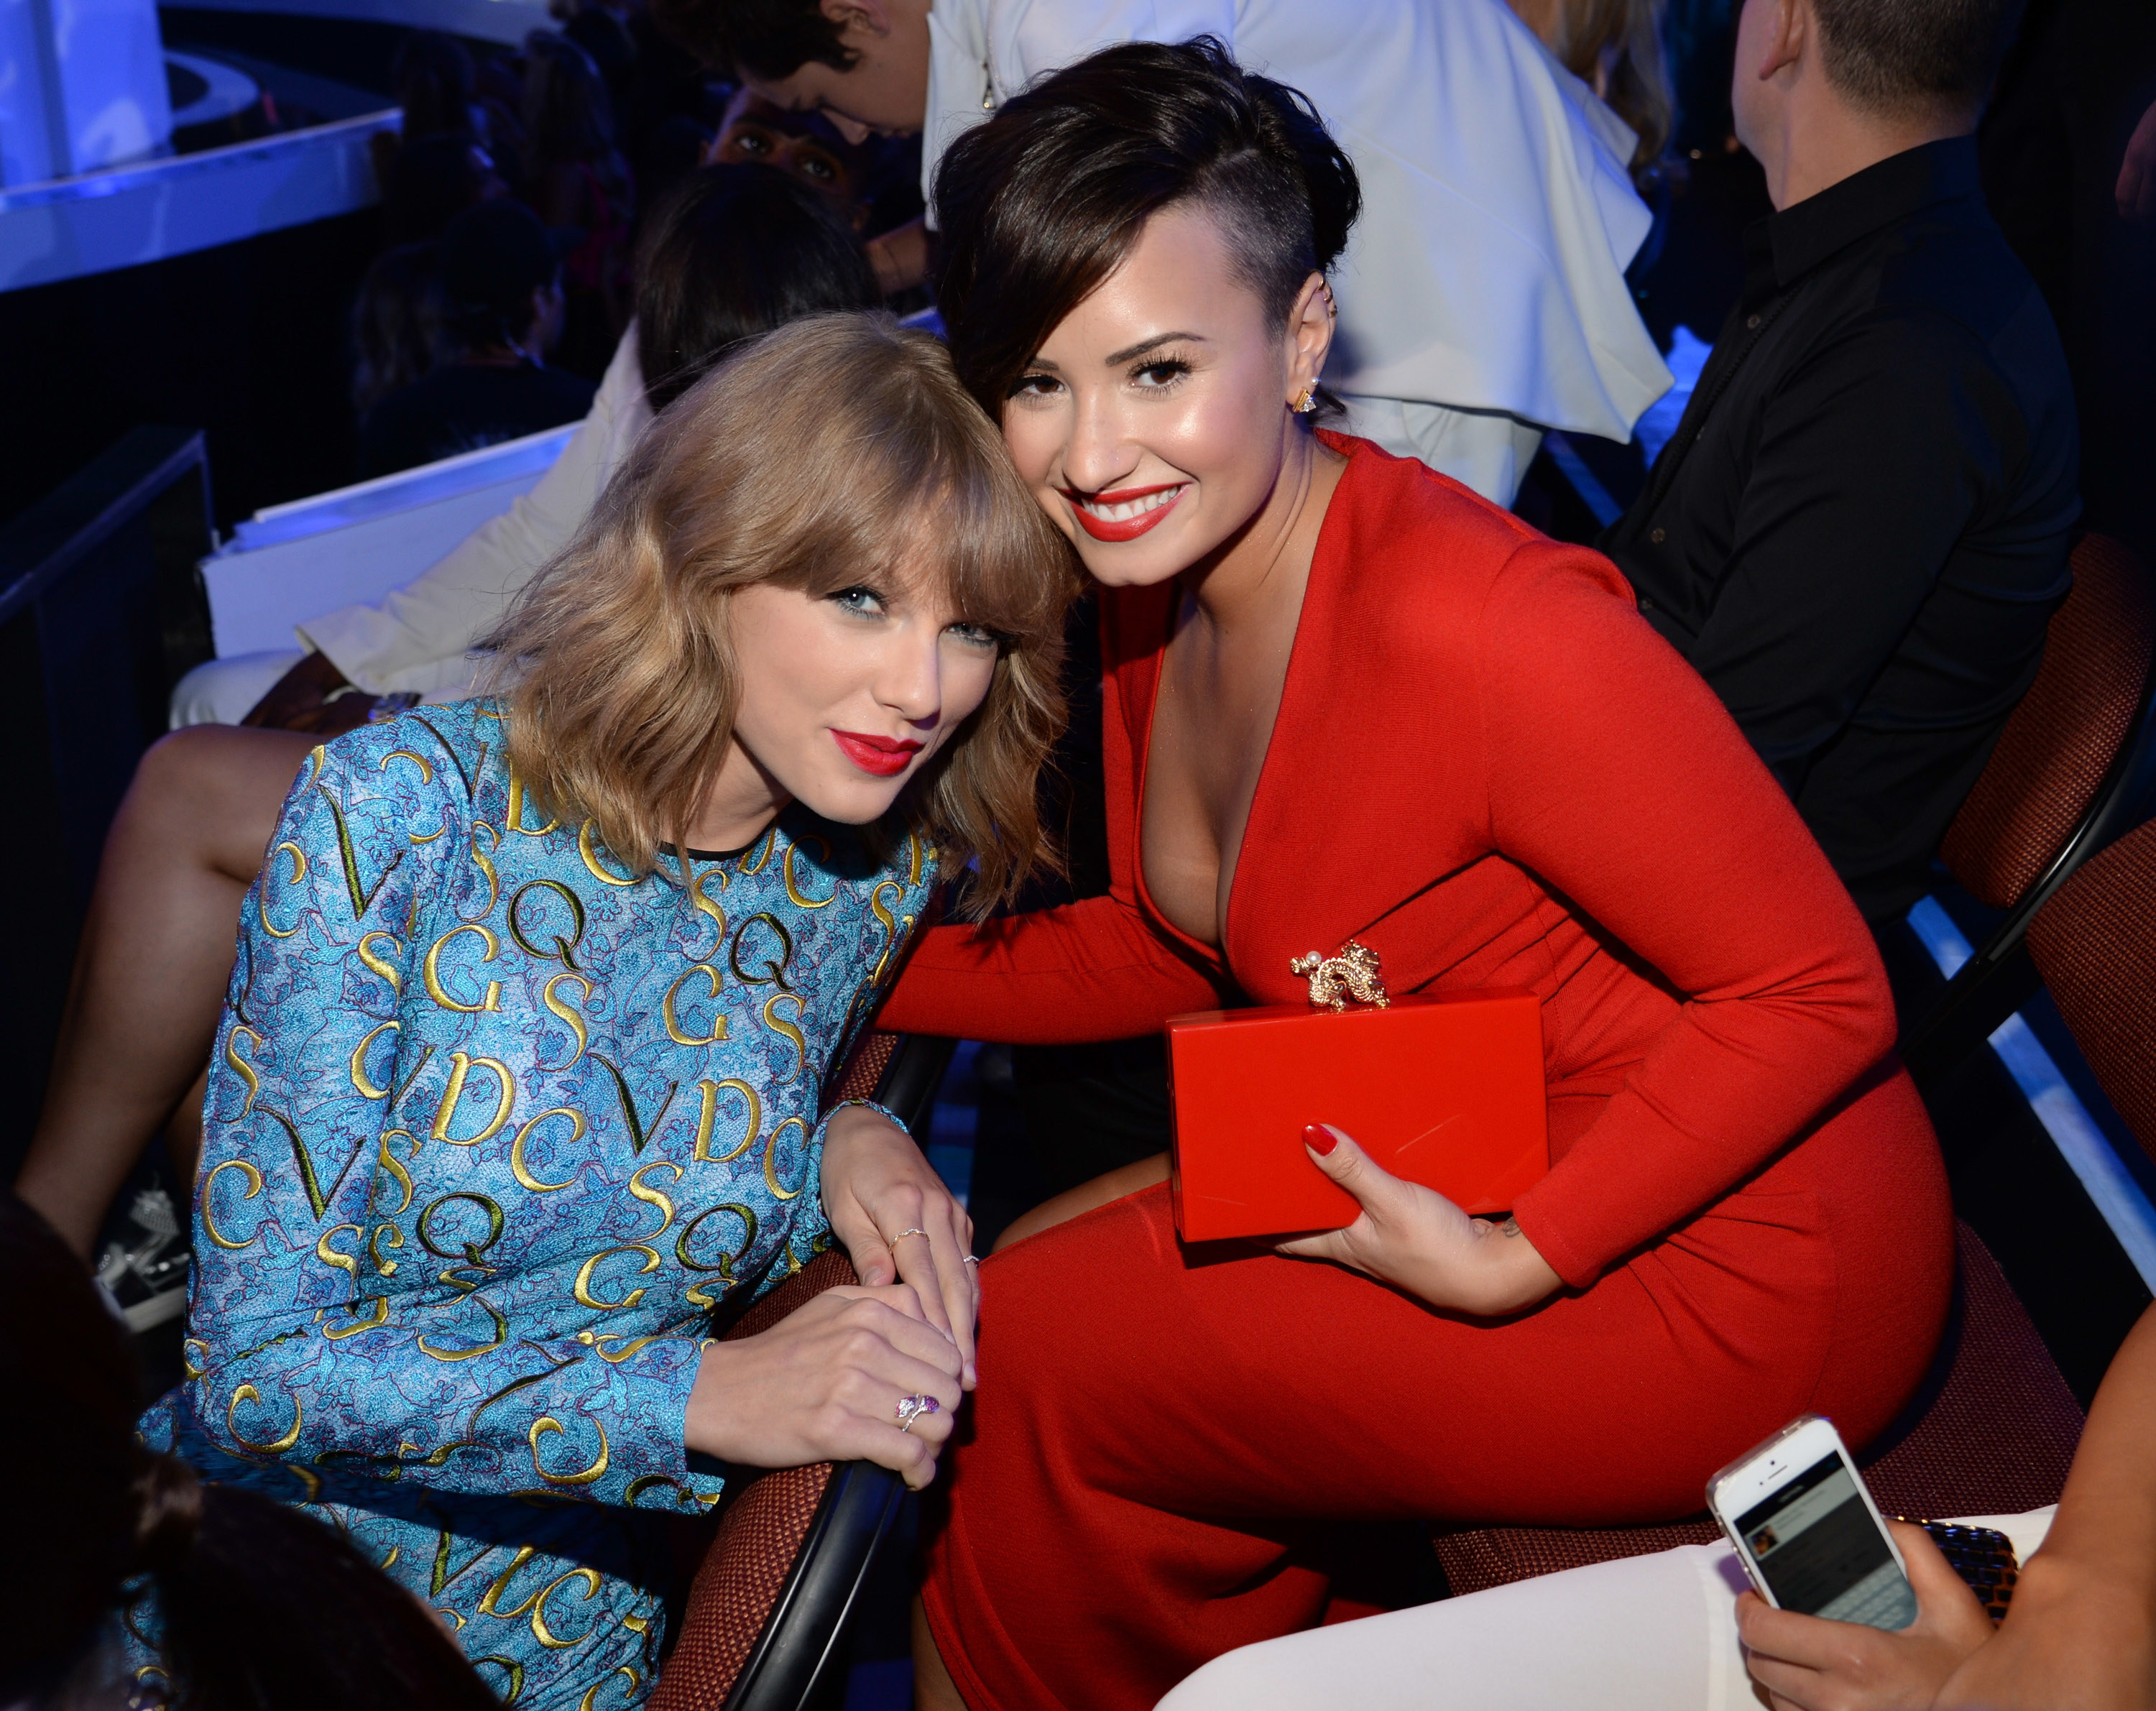 Taylor Swift and Demi Lovato lean in toward each other for a photo while sitting in the audience of the VMA awards